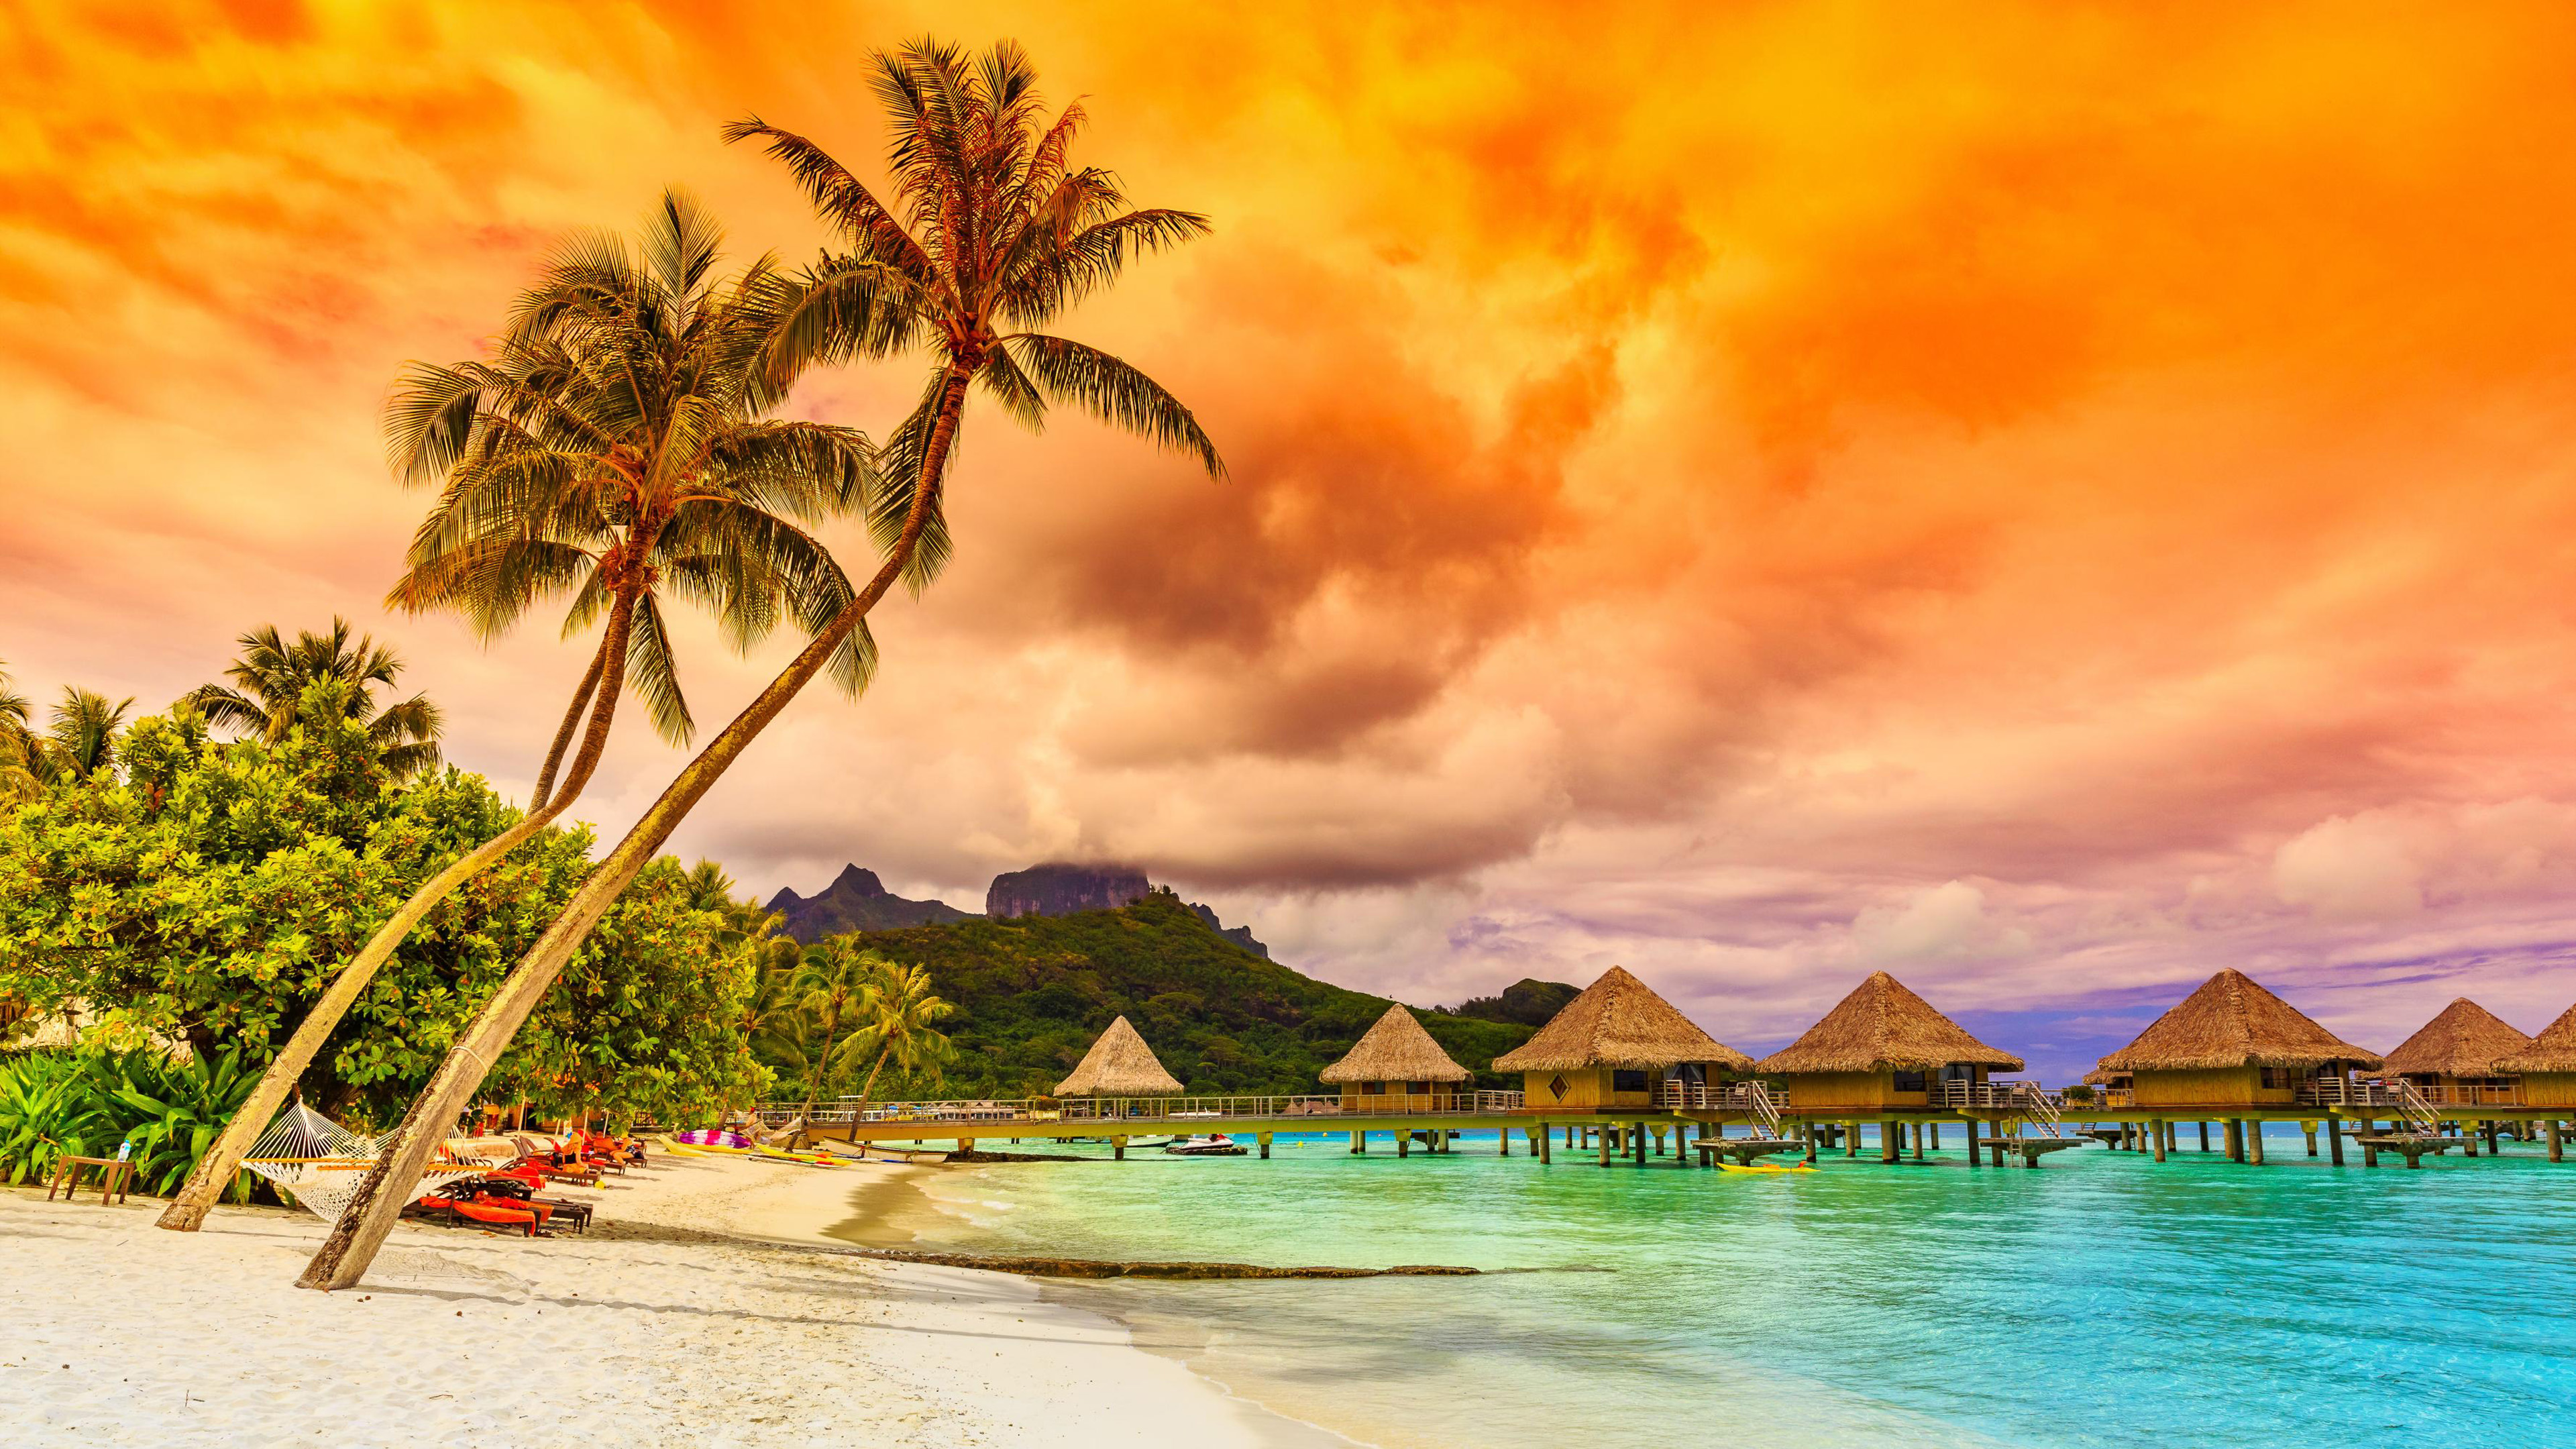 Sunset Tropical Sea Beach Bora Bora Bungalows In Water Pond Coconut Trees Red Sky Clouds Hd